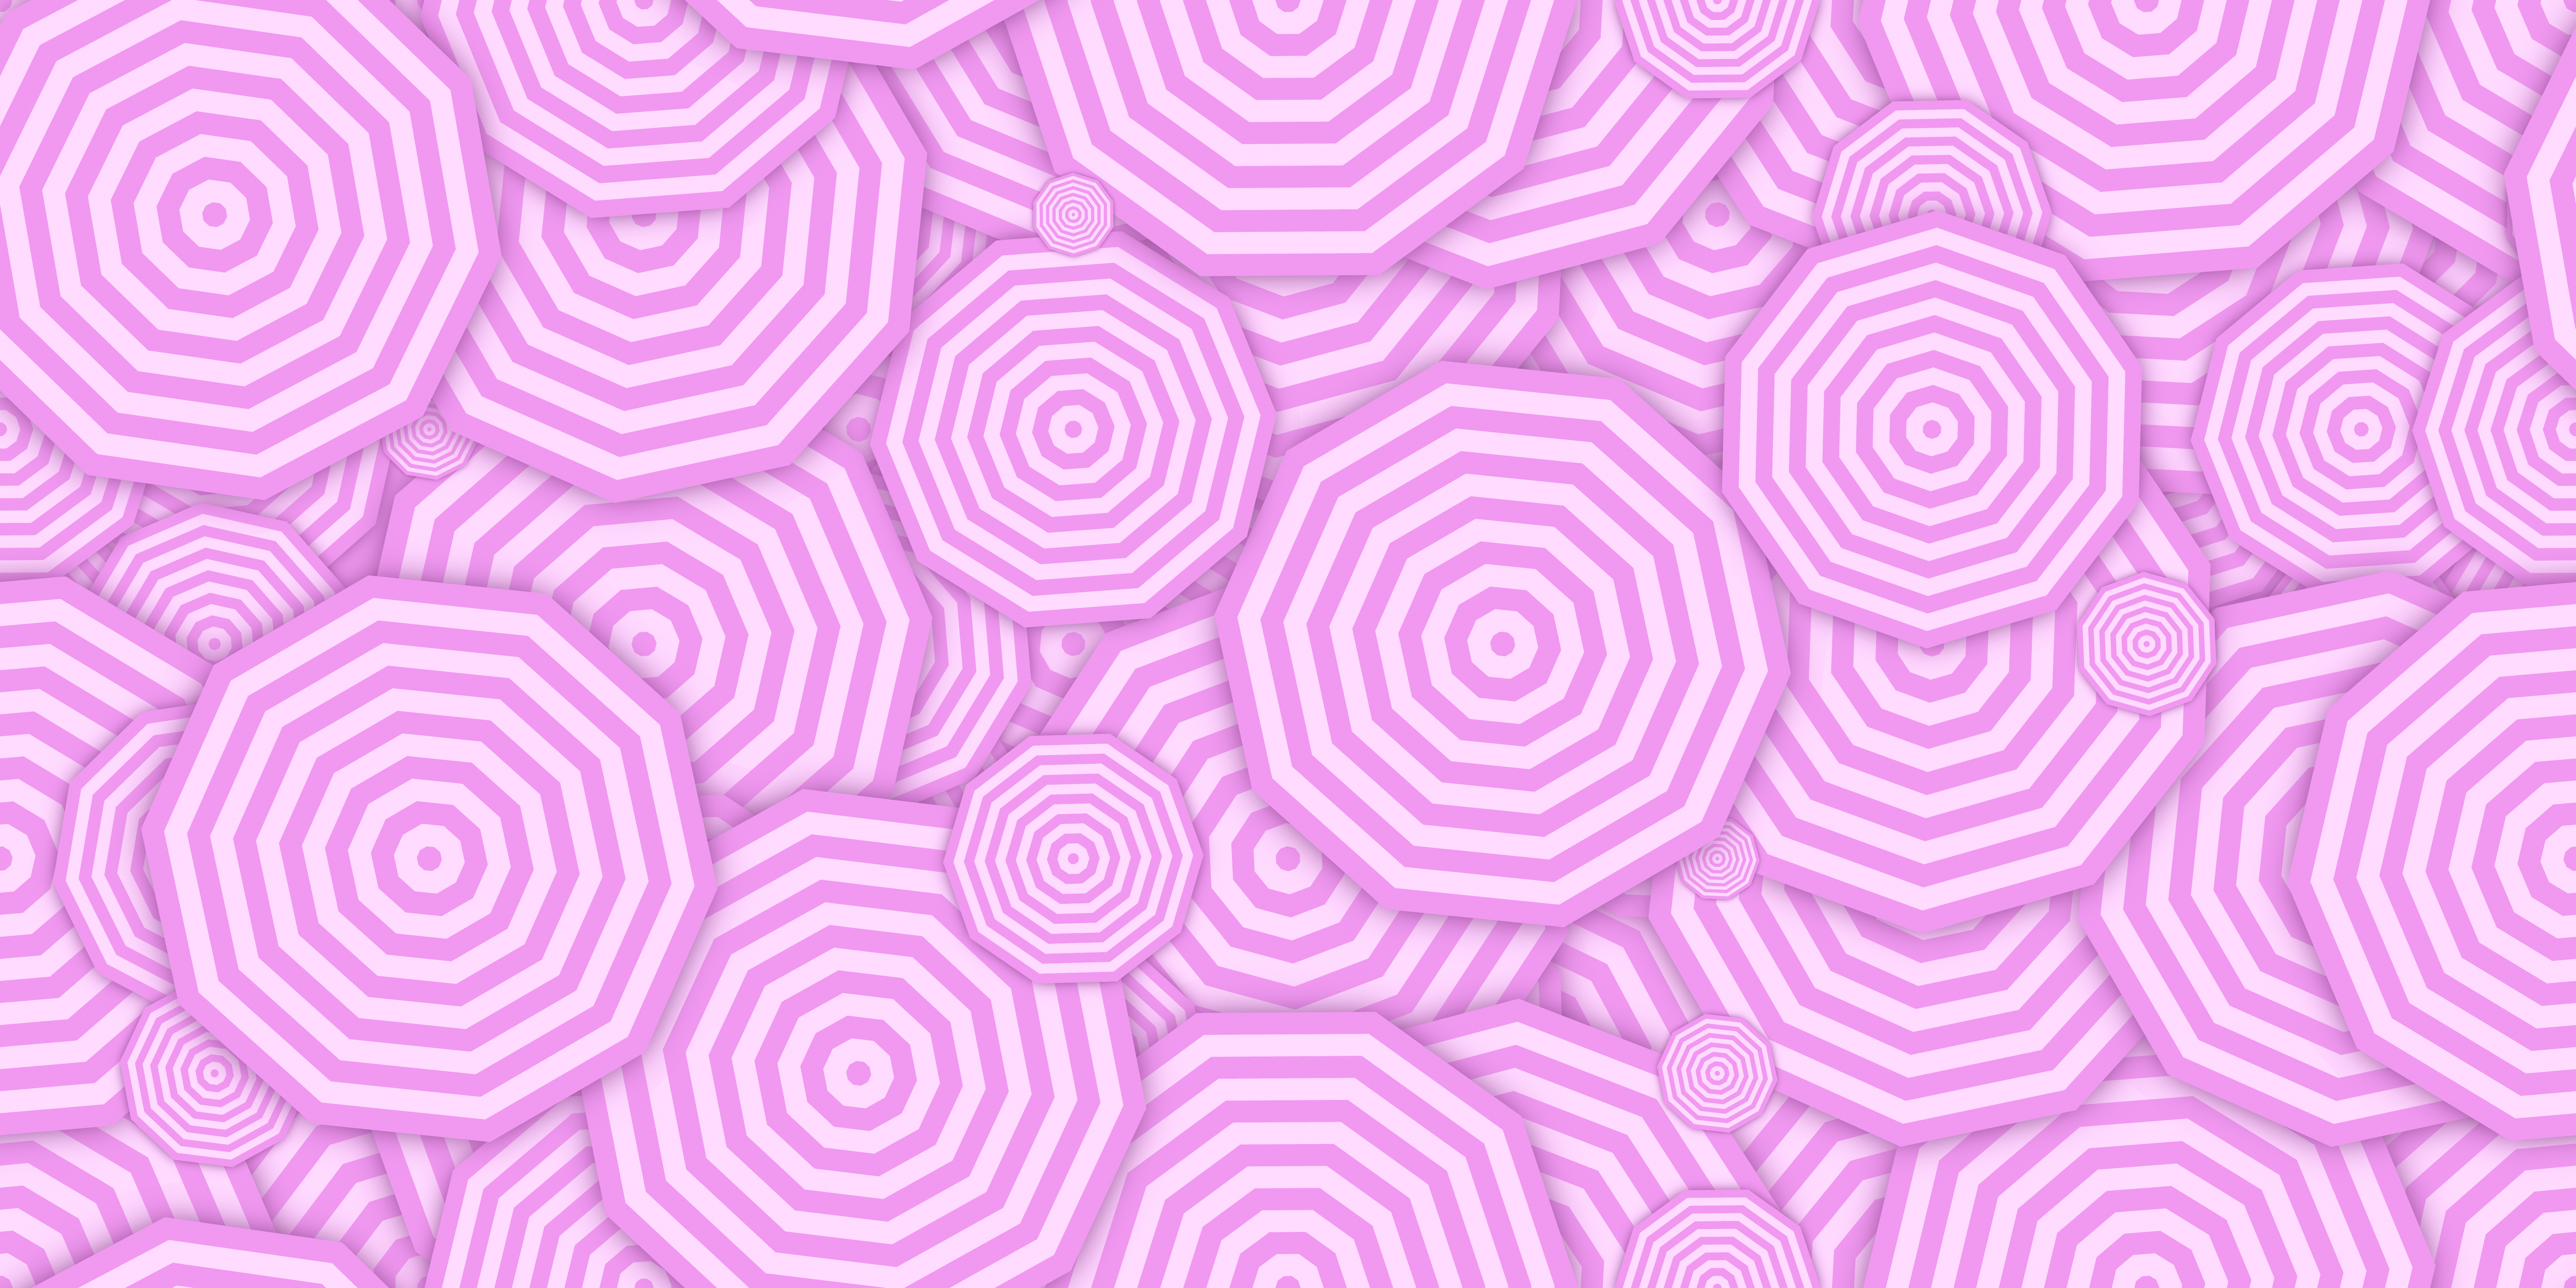 Pink concentric polygons background